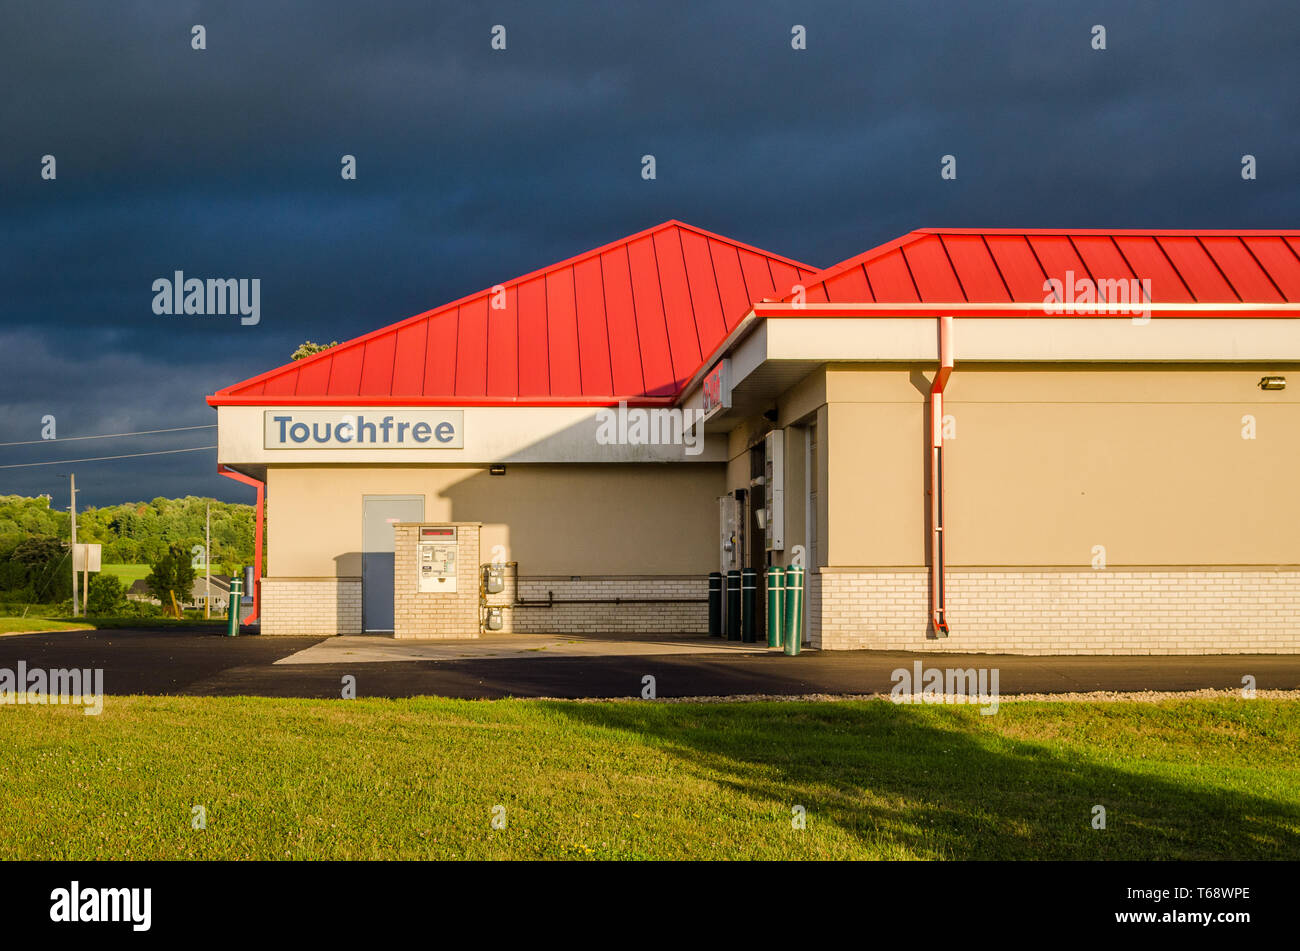 Touchfree car wash blue sky red roof Stock Photo